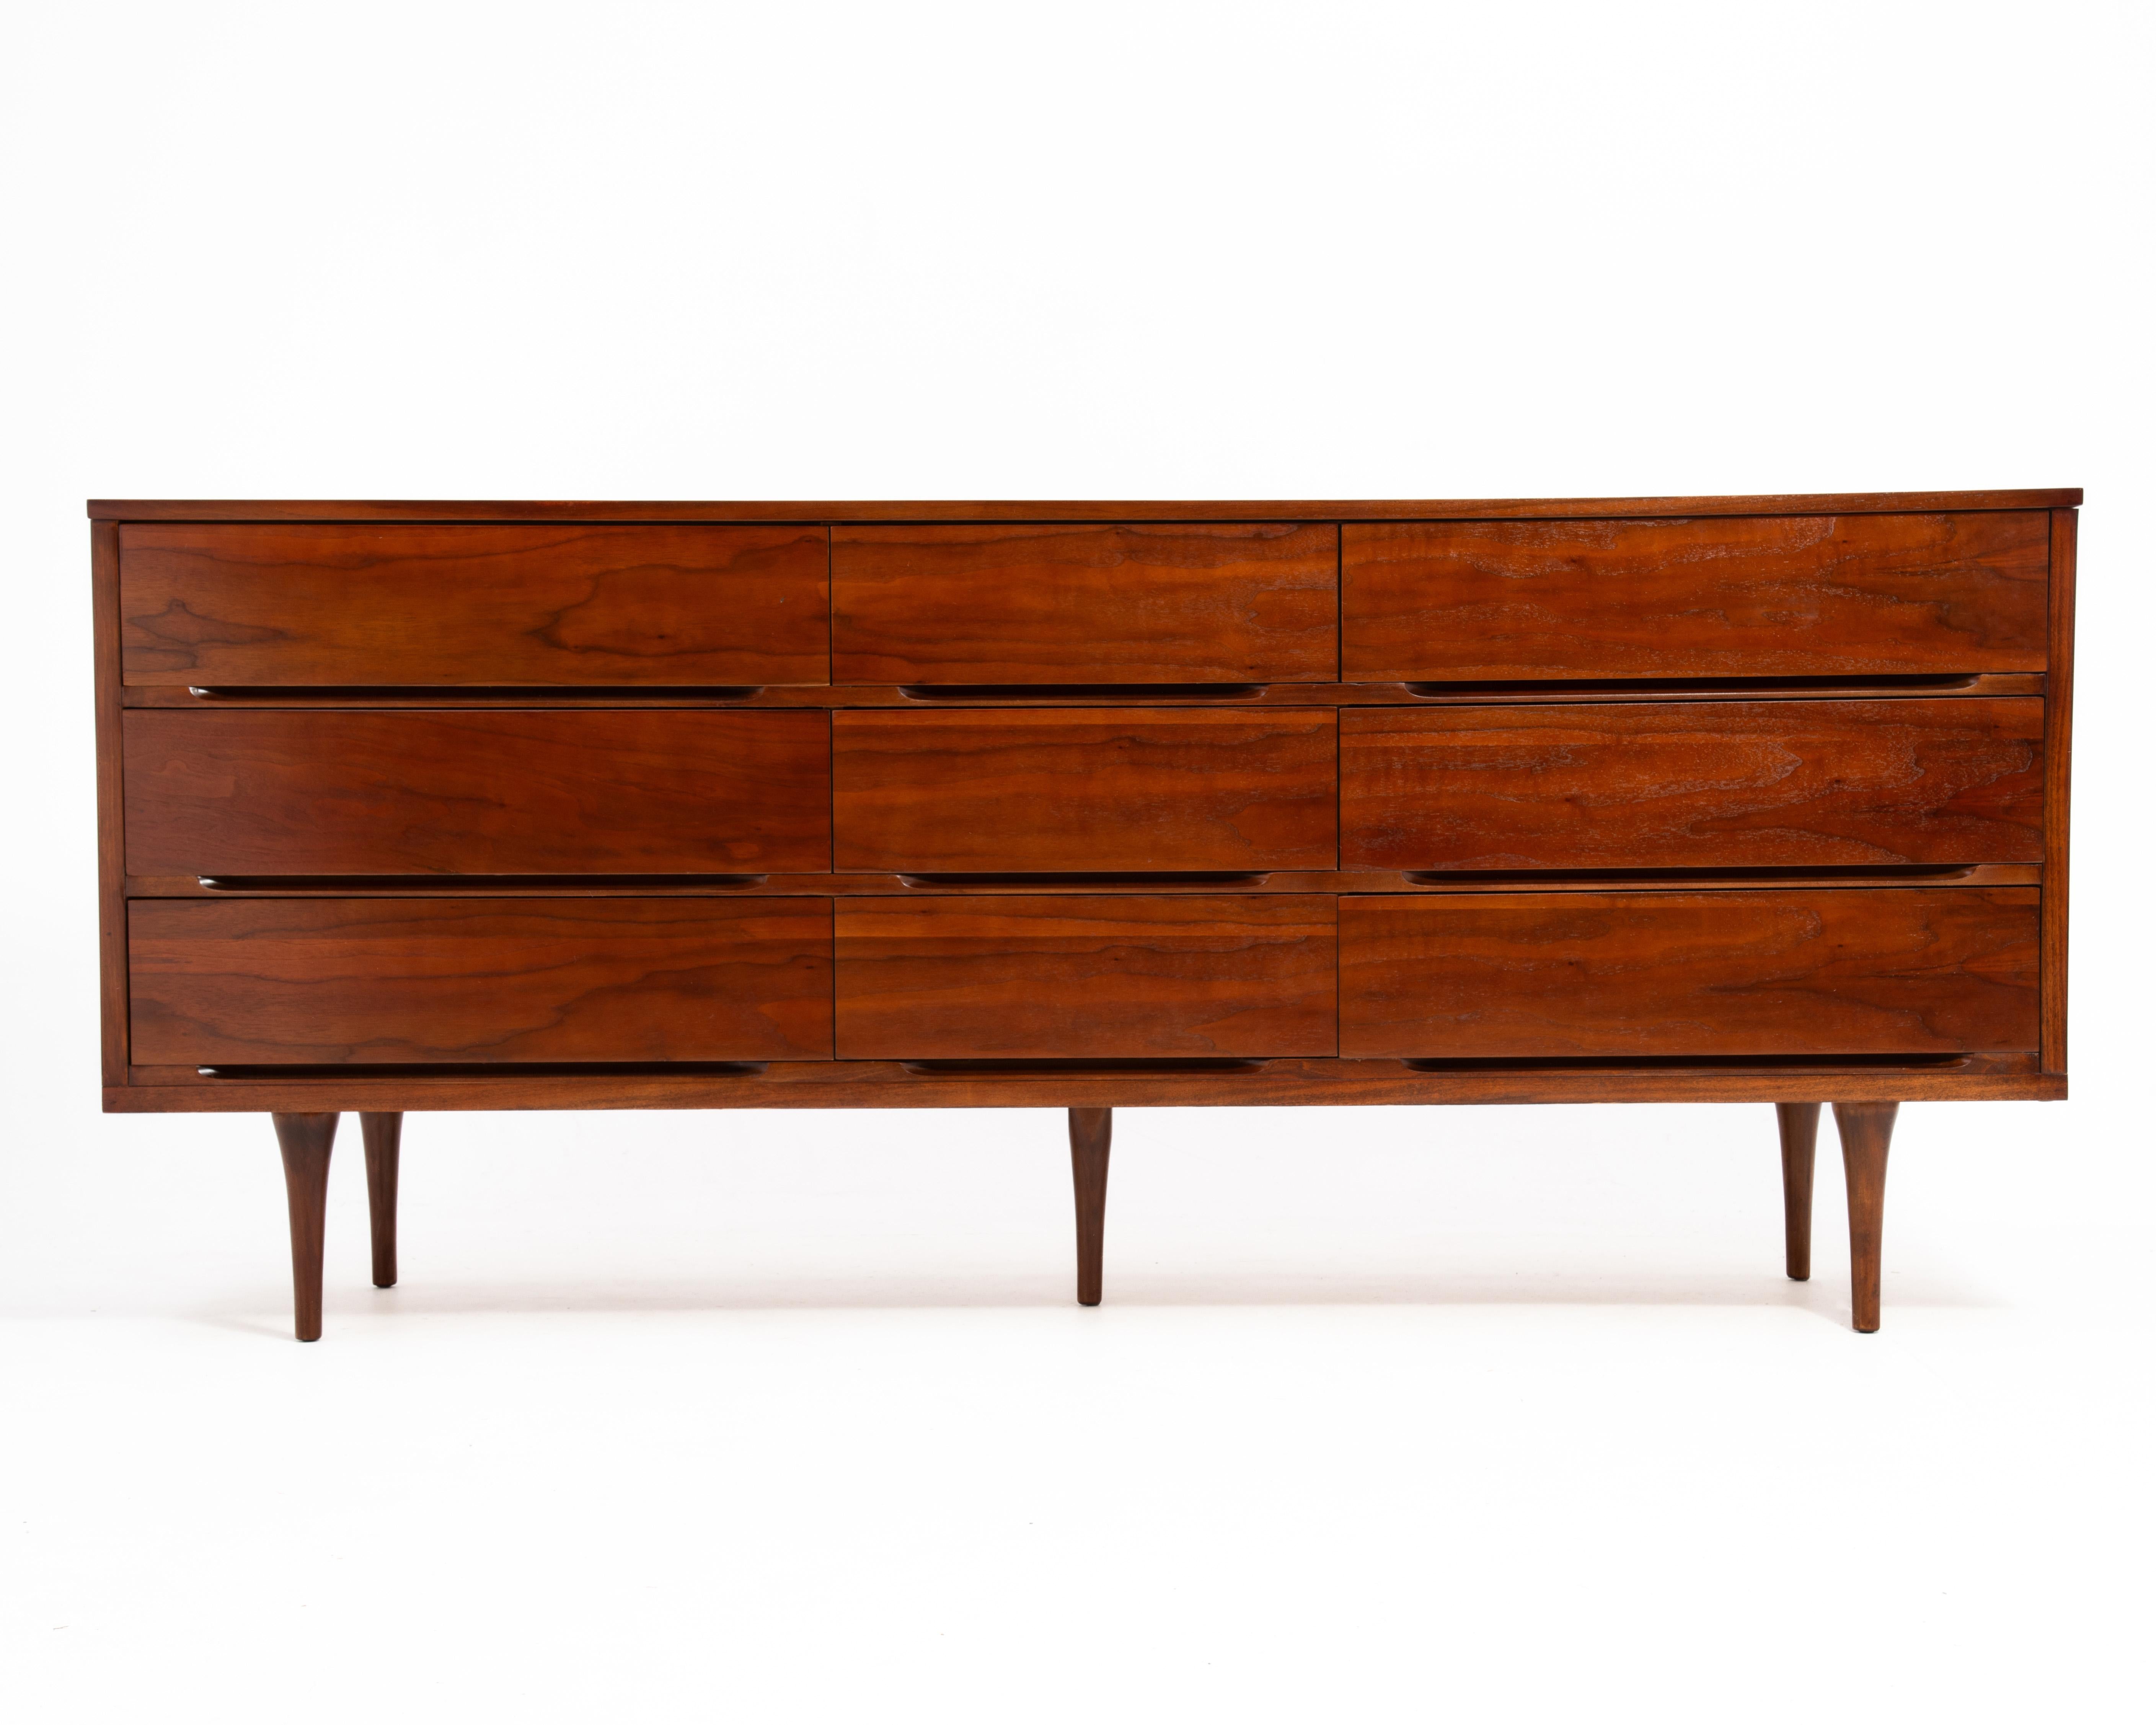 A professionally refinished and well kept nine drawer Mid Century American Modern walnut dresser. The walnut is beautiful, well chosen and book matched. This dresser has tapered legs and 9 drawers. The drawers have hidden pulls beneath the drawer